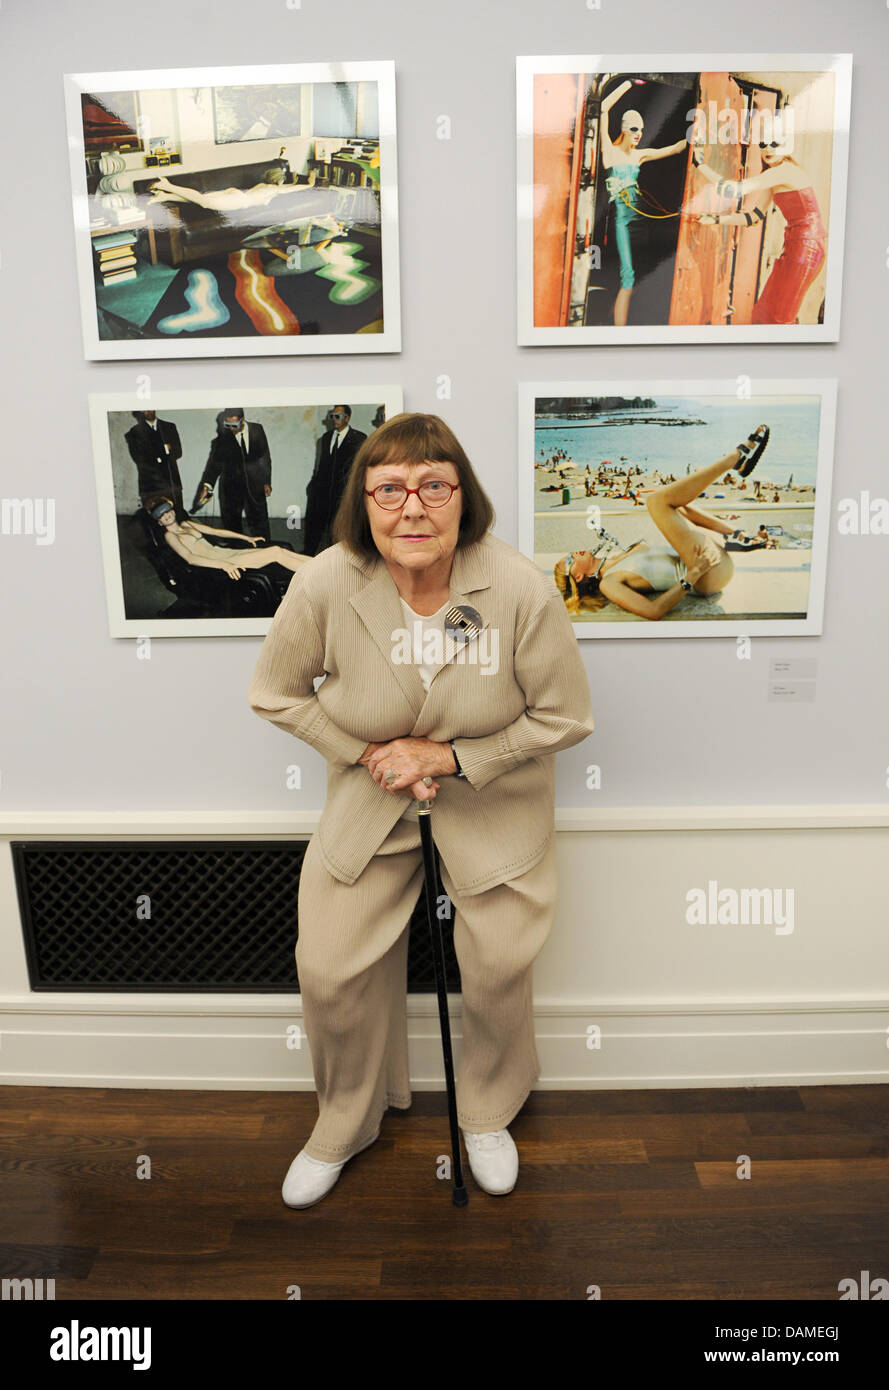 June Newton, the widow of Helmut Newton, poses in front of enlarged polaroid  photos of her husband at the Museum of Photography in Berlin, Germany, 09  June 2011. Between 10 June 2011